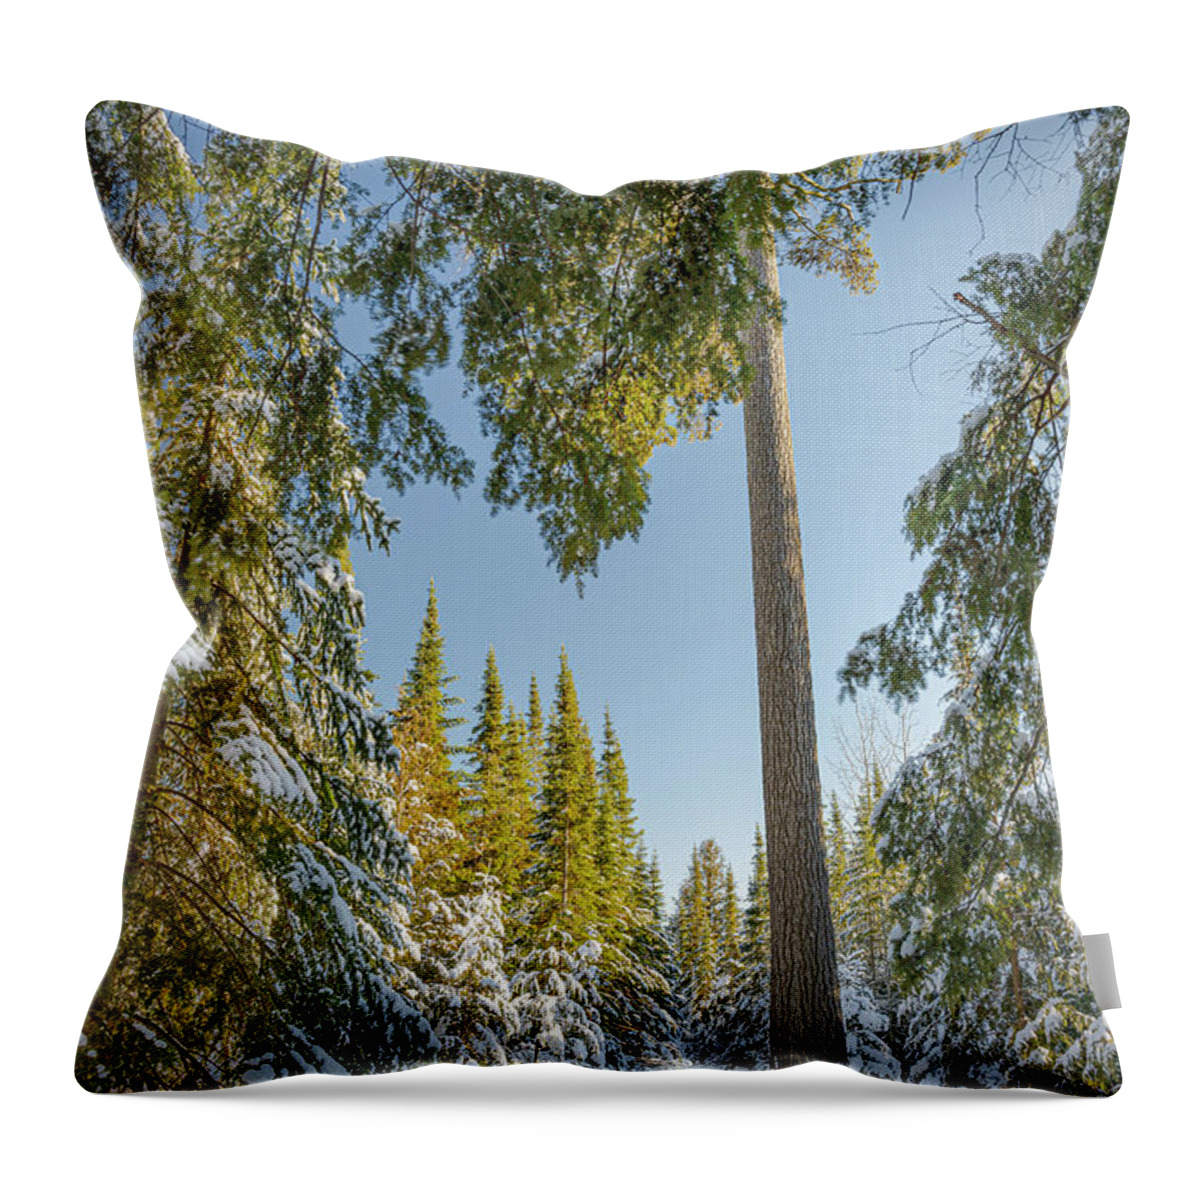 #winter #landscape #photograph #fine Art #door County #wisconsin #midwest #wall Décor #wall Art #hiking #walking #long Exposure #focus Stacking #hdr Photography #adventure #outside #environment #outdoor Lover #snow #ice #cold #snowshoeing # Cross Country Skiing   Throw Pillow featuring the photograph Tall by David Heilman